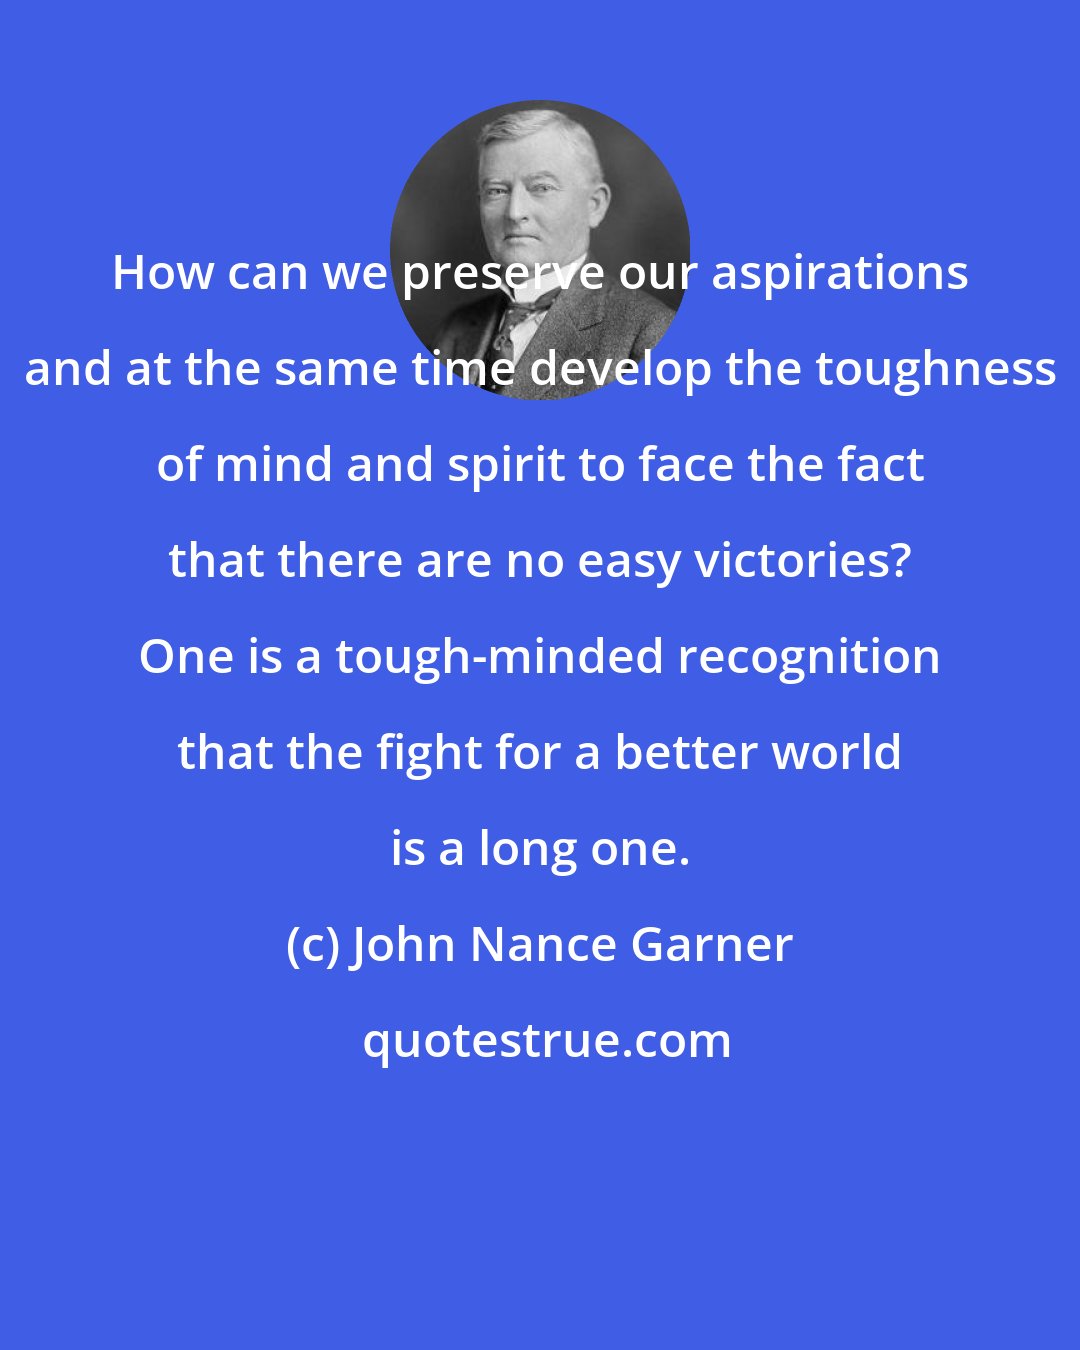 John Nance Garner: How can we preserve our aspirations and at the same time develop the toughness of mind and spirit to face the fact that there are no easy victories? One is a tough-minded recognition that the fight for a better world is a long one.